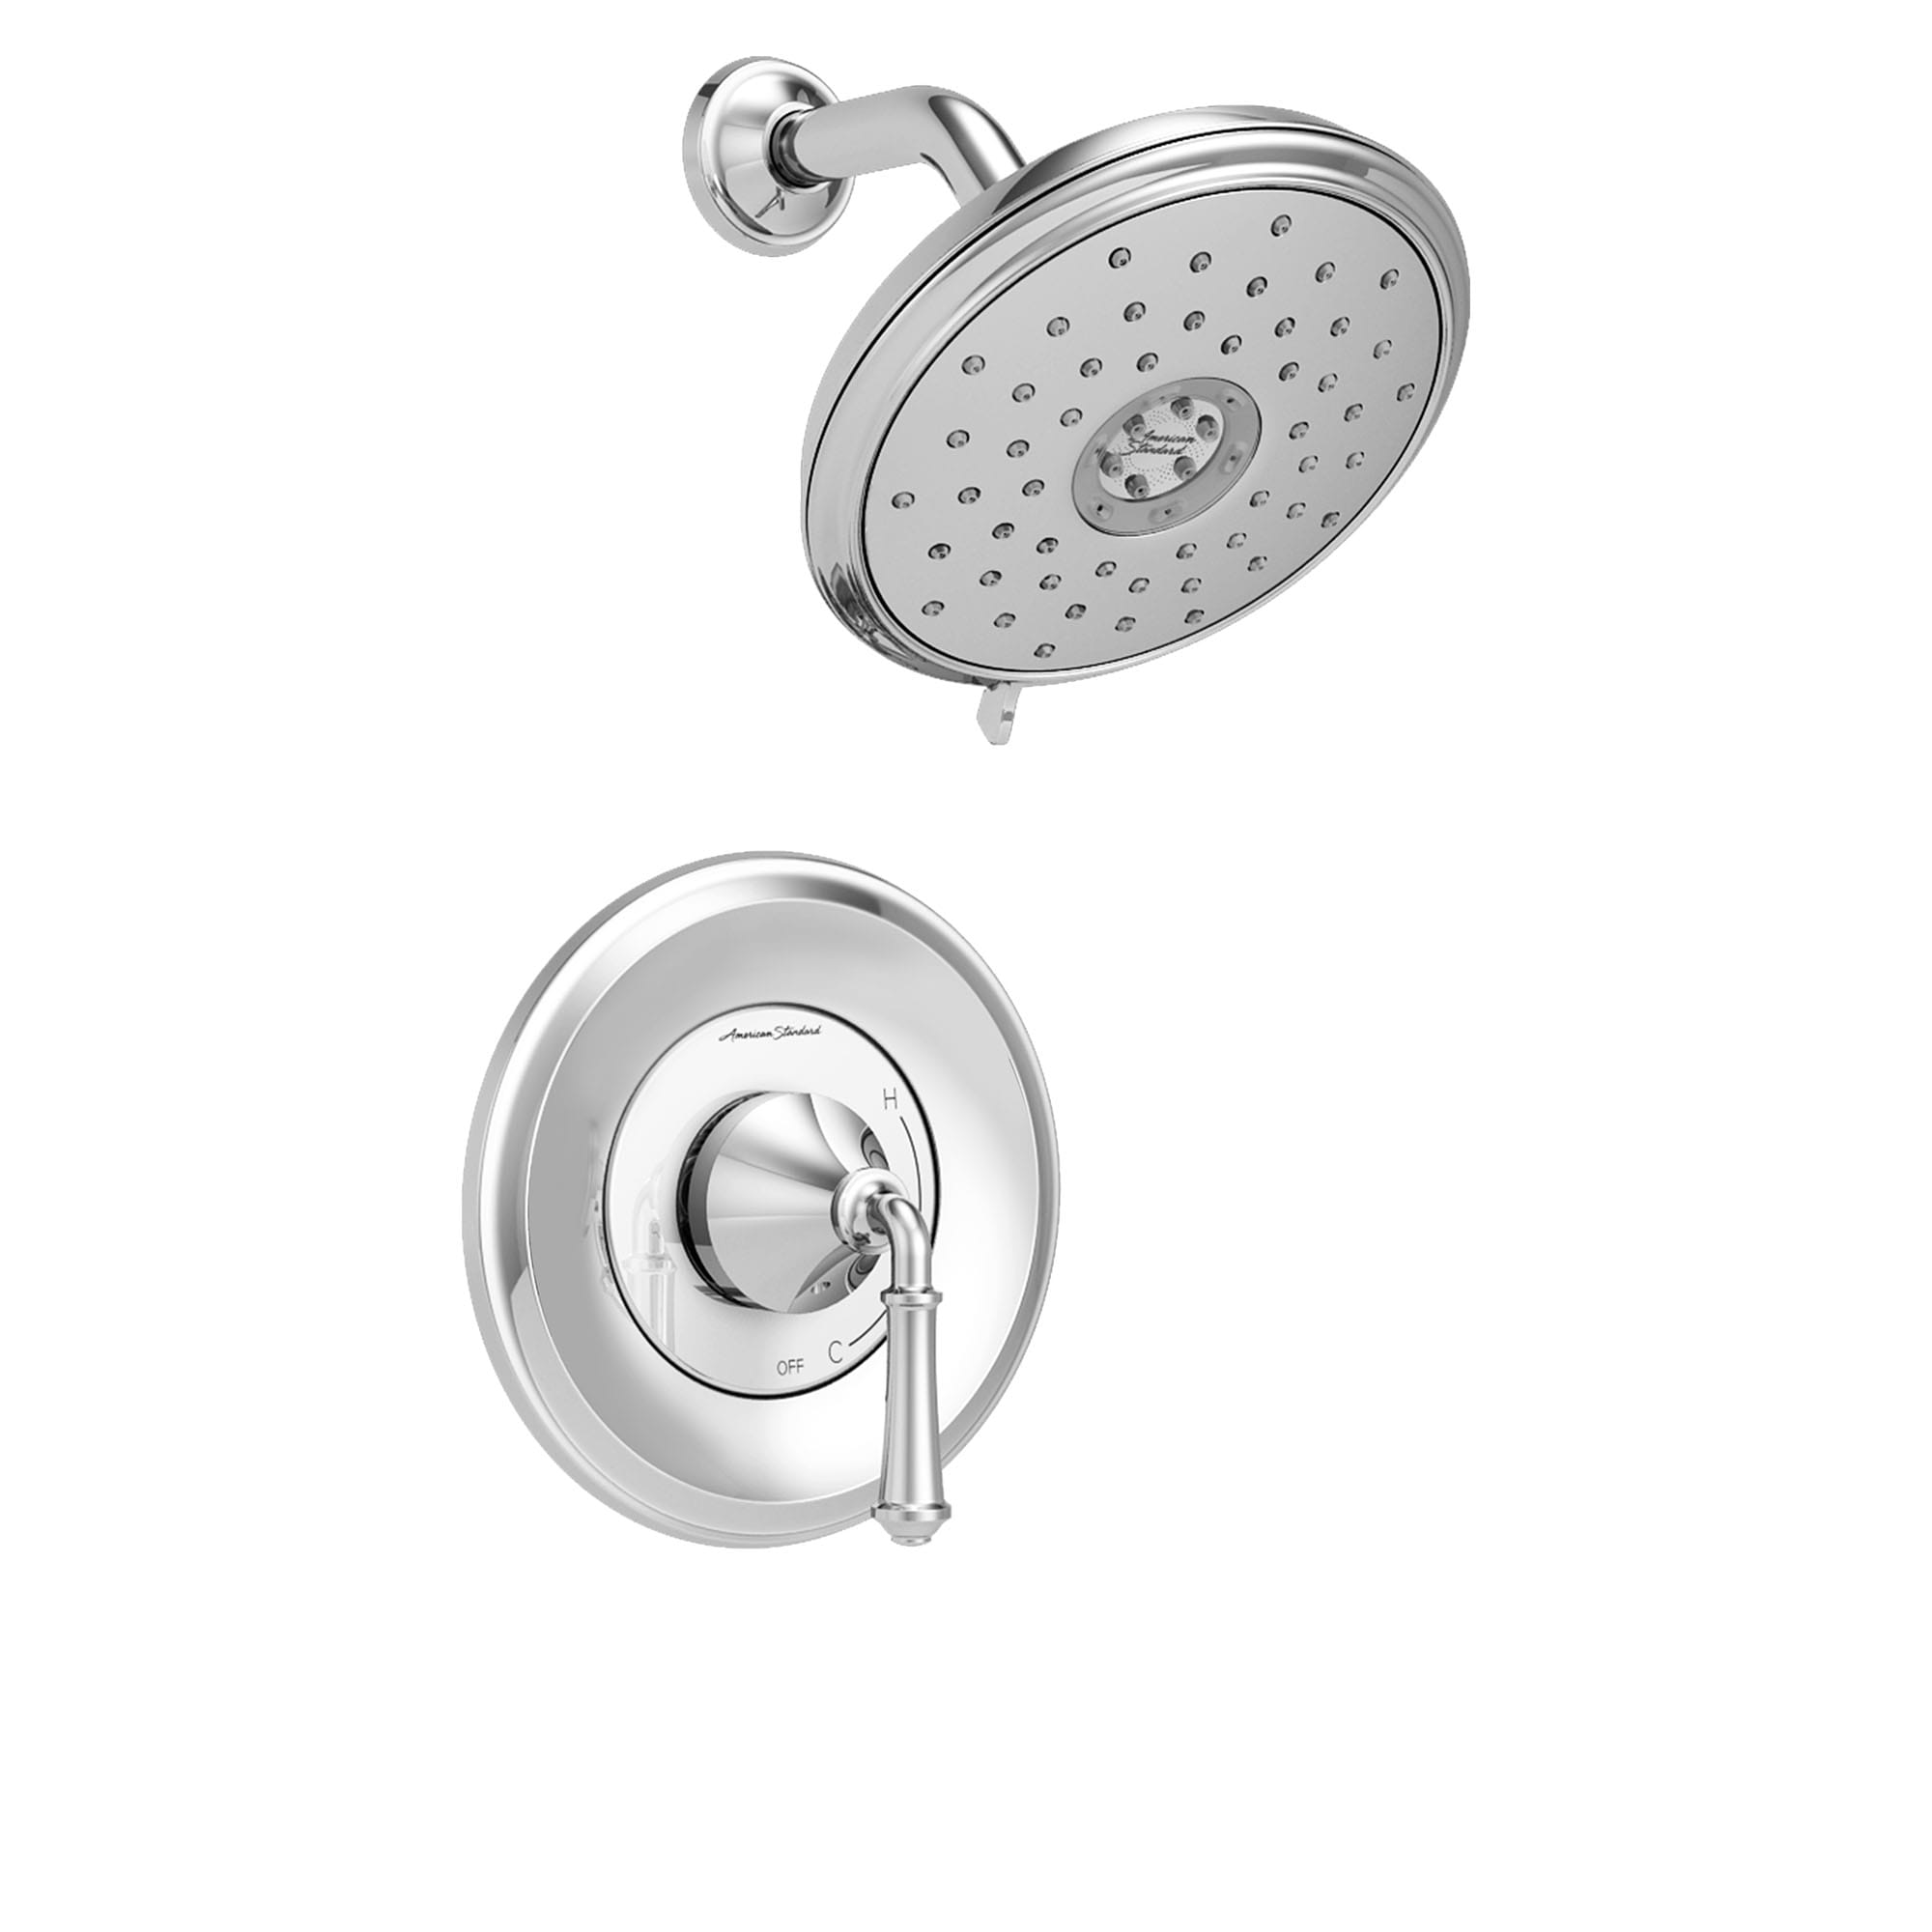 Delancey™ 1.8 gpm/6.8 L/min Shower Trim Kit With Water-Saving 4-Function Showerhead and Lever Handle